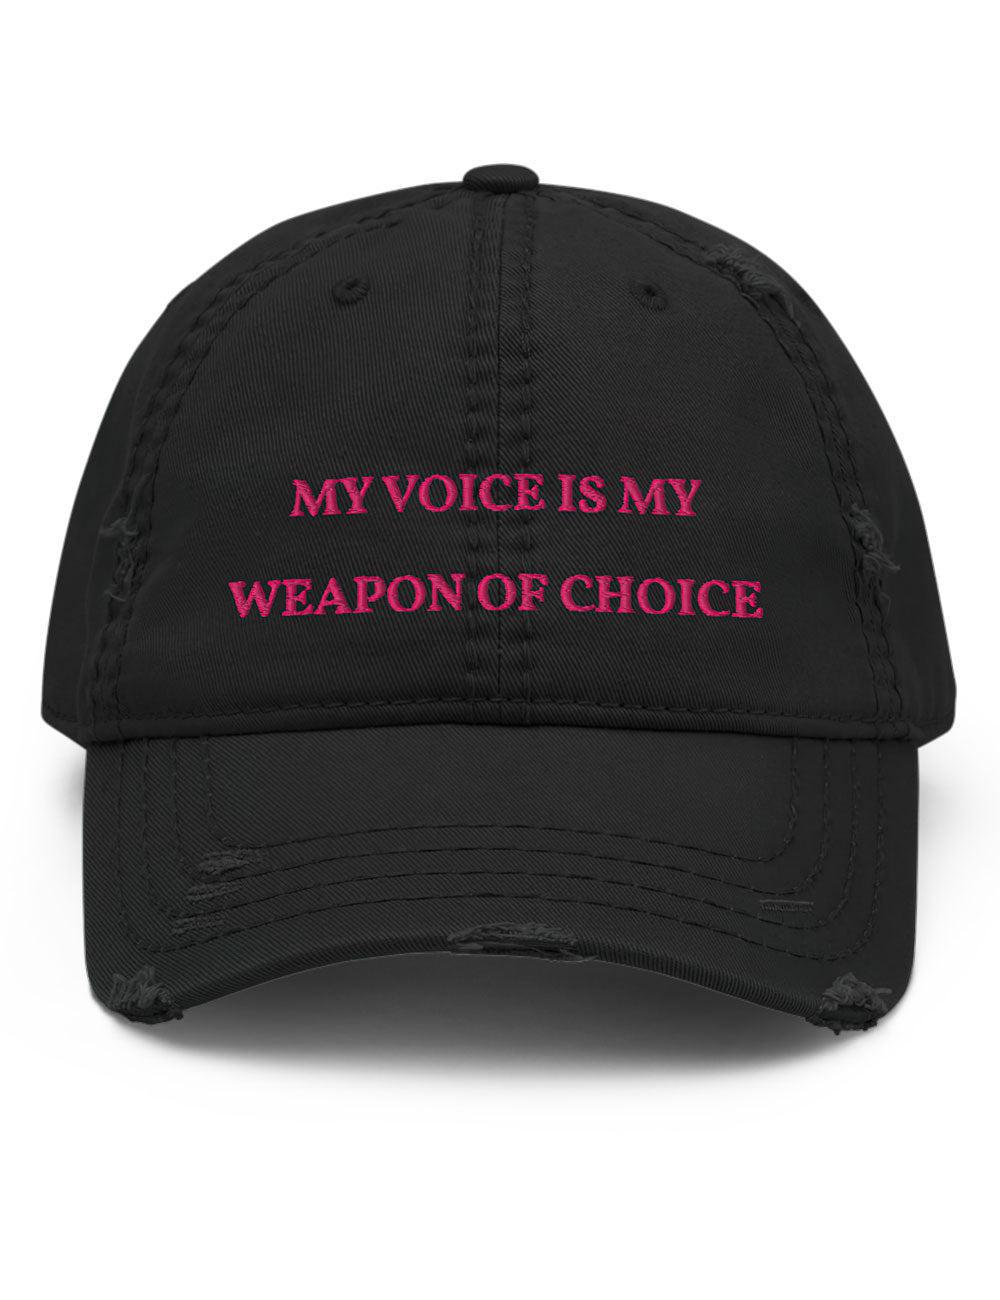 "Weapon of Choice" Distressed Cap